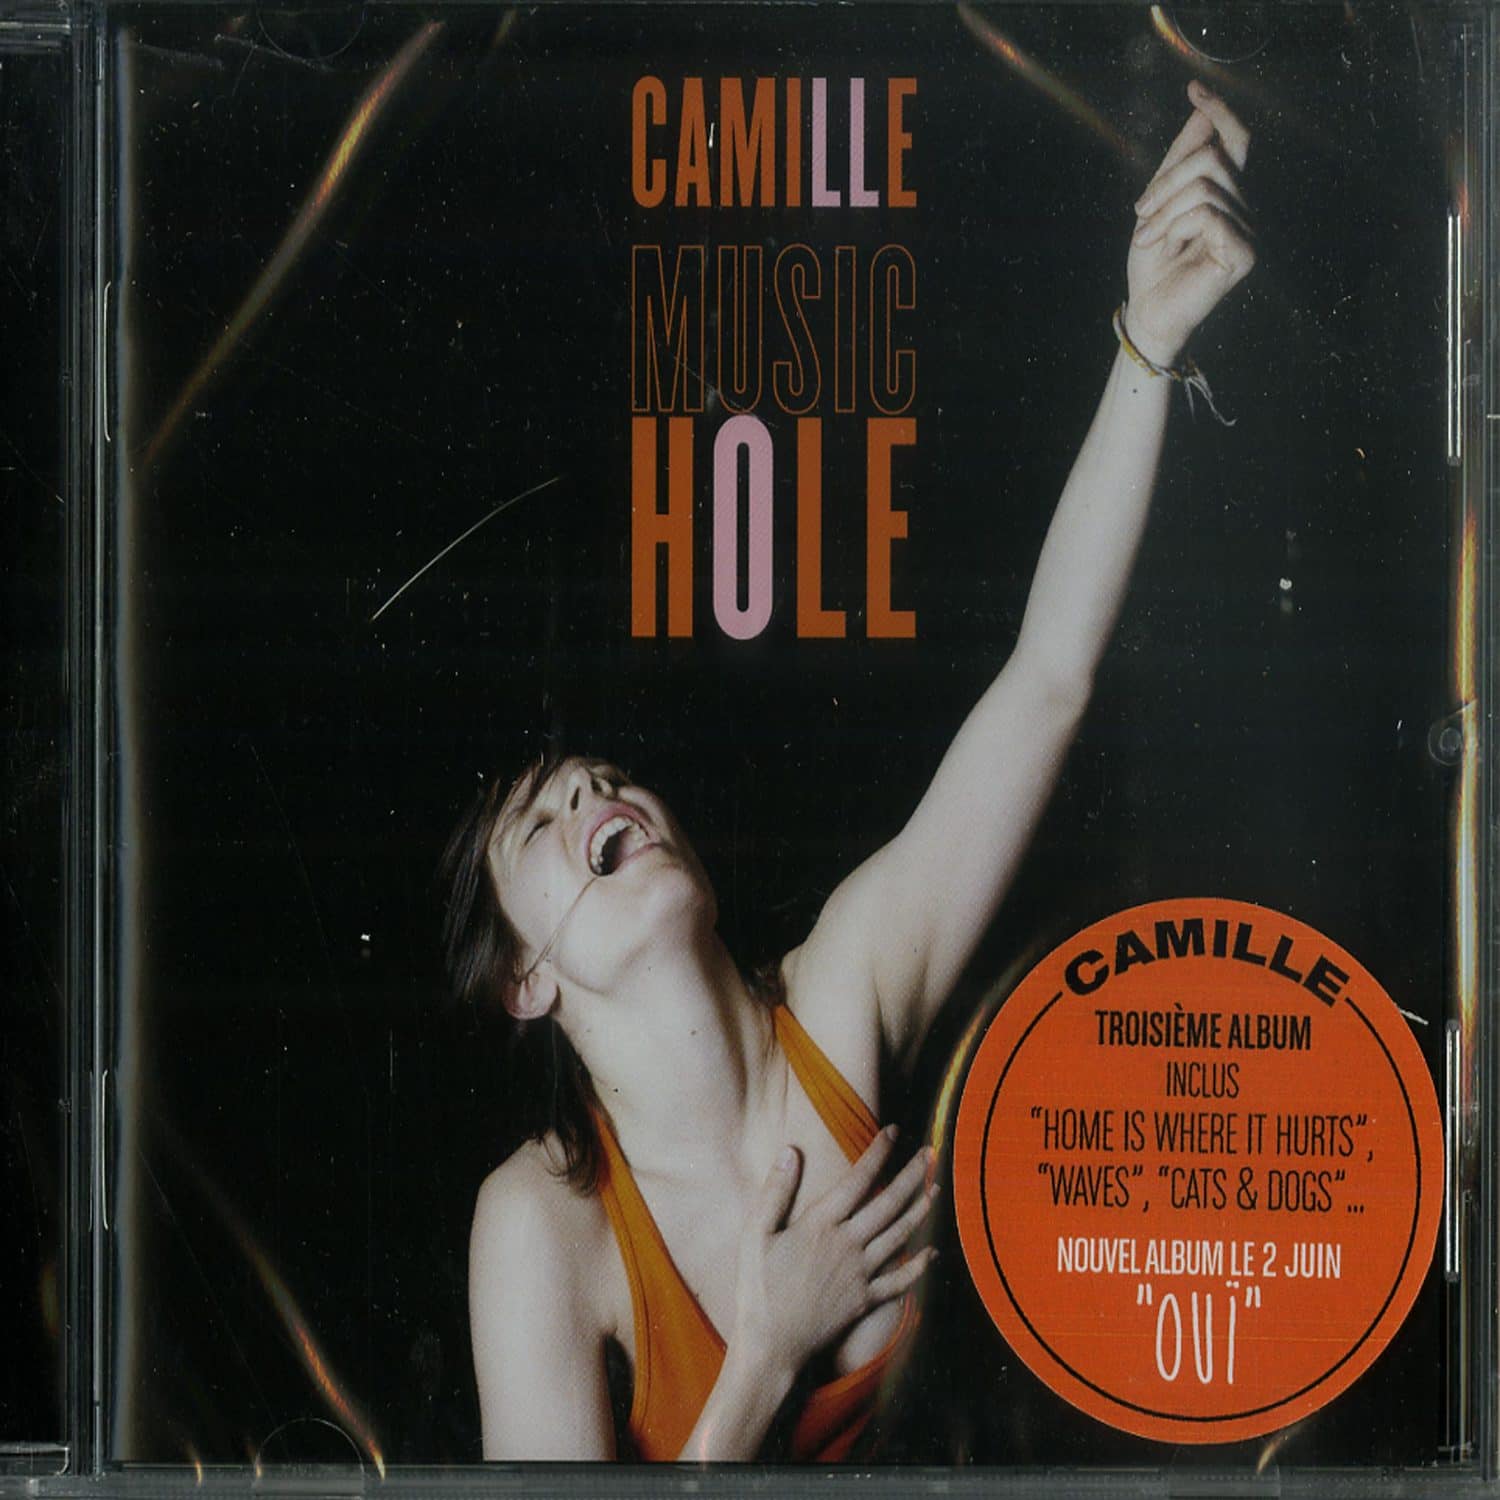 Camille - MUSIC HOLE 